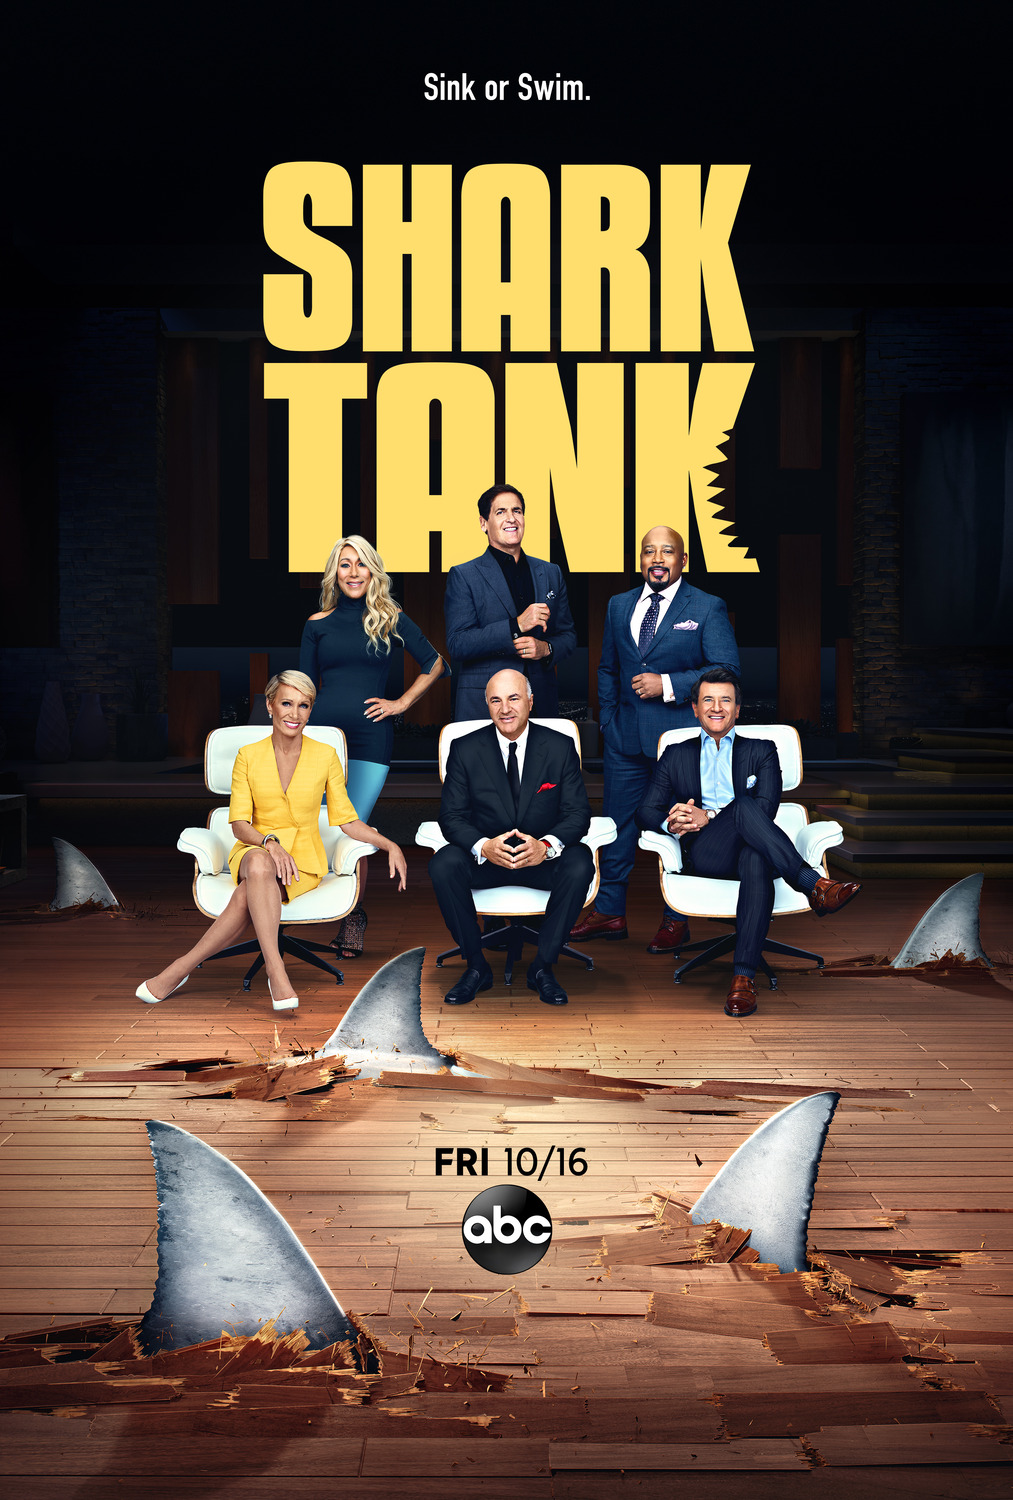 Extra Large TV Poster Image for Shark Tank (#4 of 9)